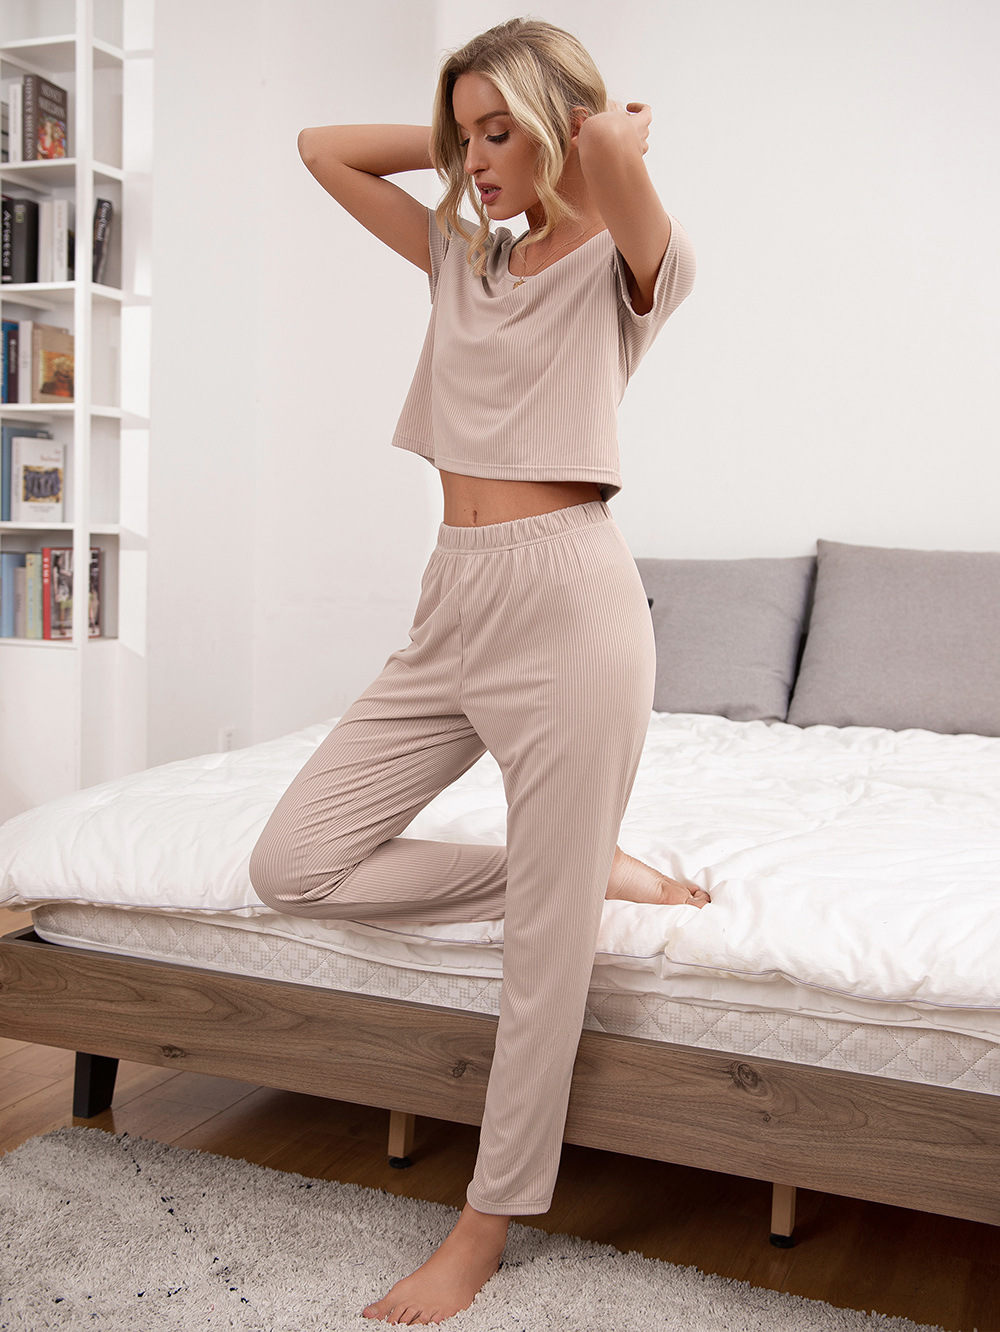 Women's Loungewear Short Sleeve Round Neck Top Trousers Casual Suit shopper-ever.myshopify.com